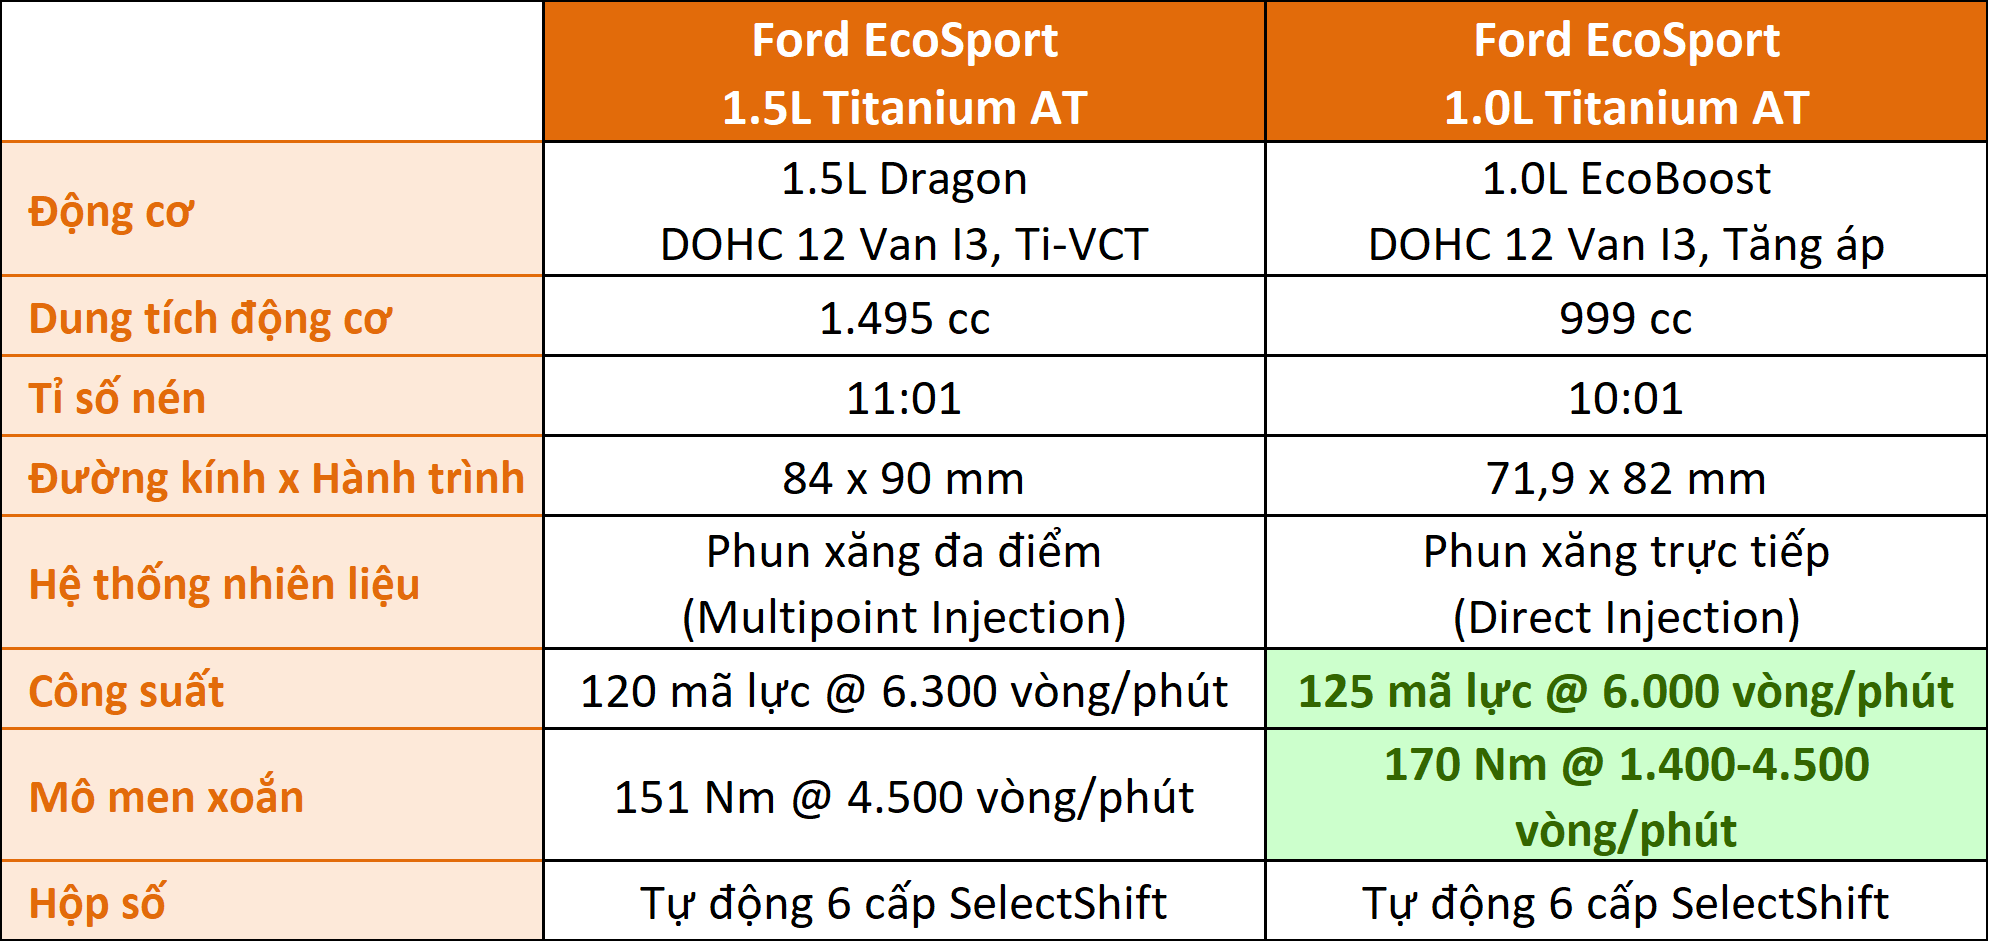 1.5_Dragon_1.0_EcoBoost_Ford_EcoSport_Xe_Tinhte.png